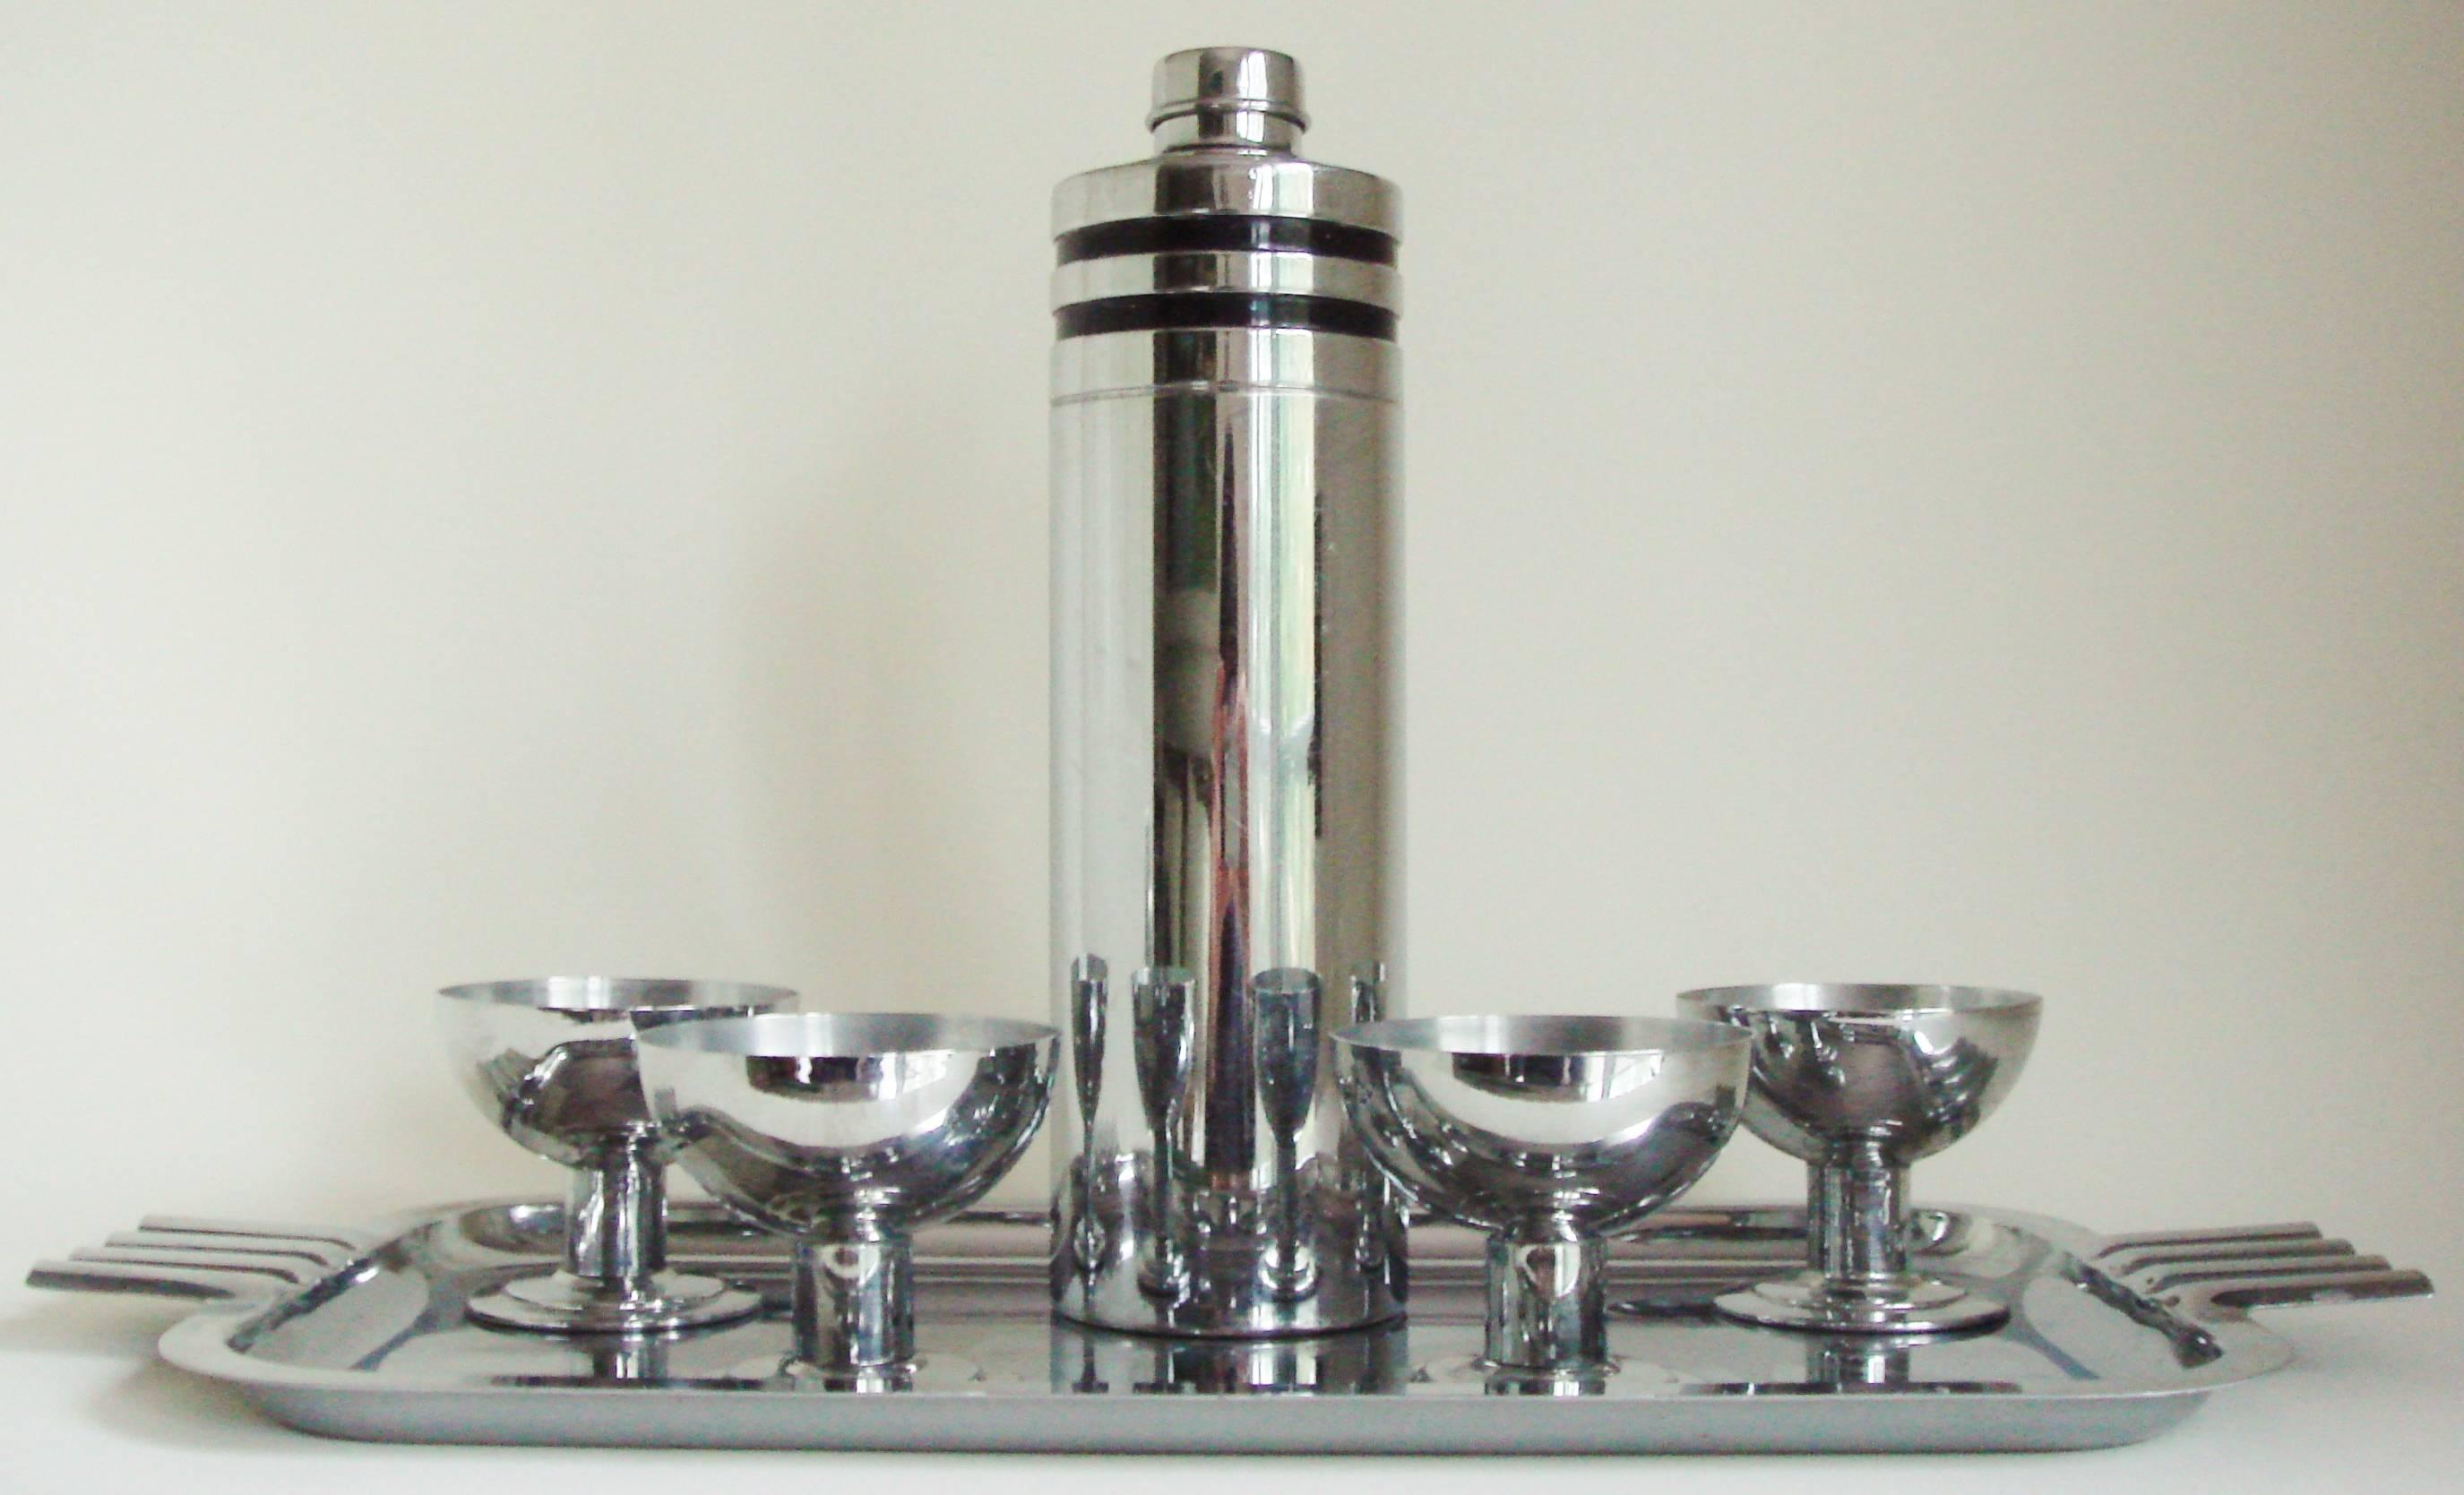 This American Art Deco six-piece cocktail set was probably assembled as a Christmas/birthday/wedding gift for a thoroughbred racing enthusiast and was made by Evercraft. The set is comprised of a black banded, signed Evercraft 'Town Shaker' cocktail